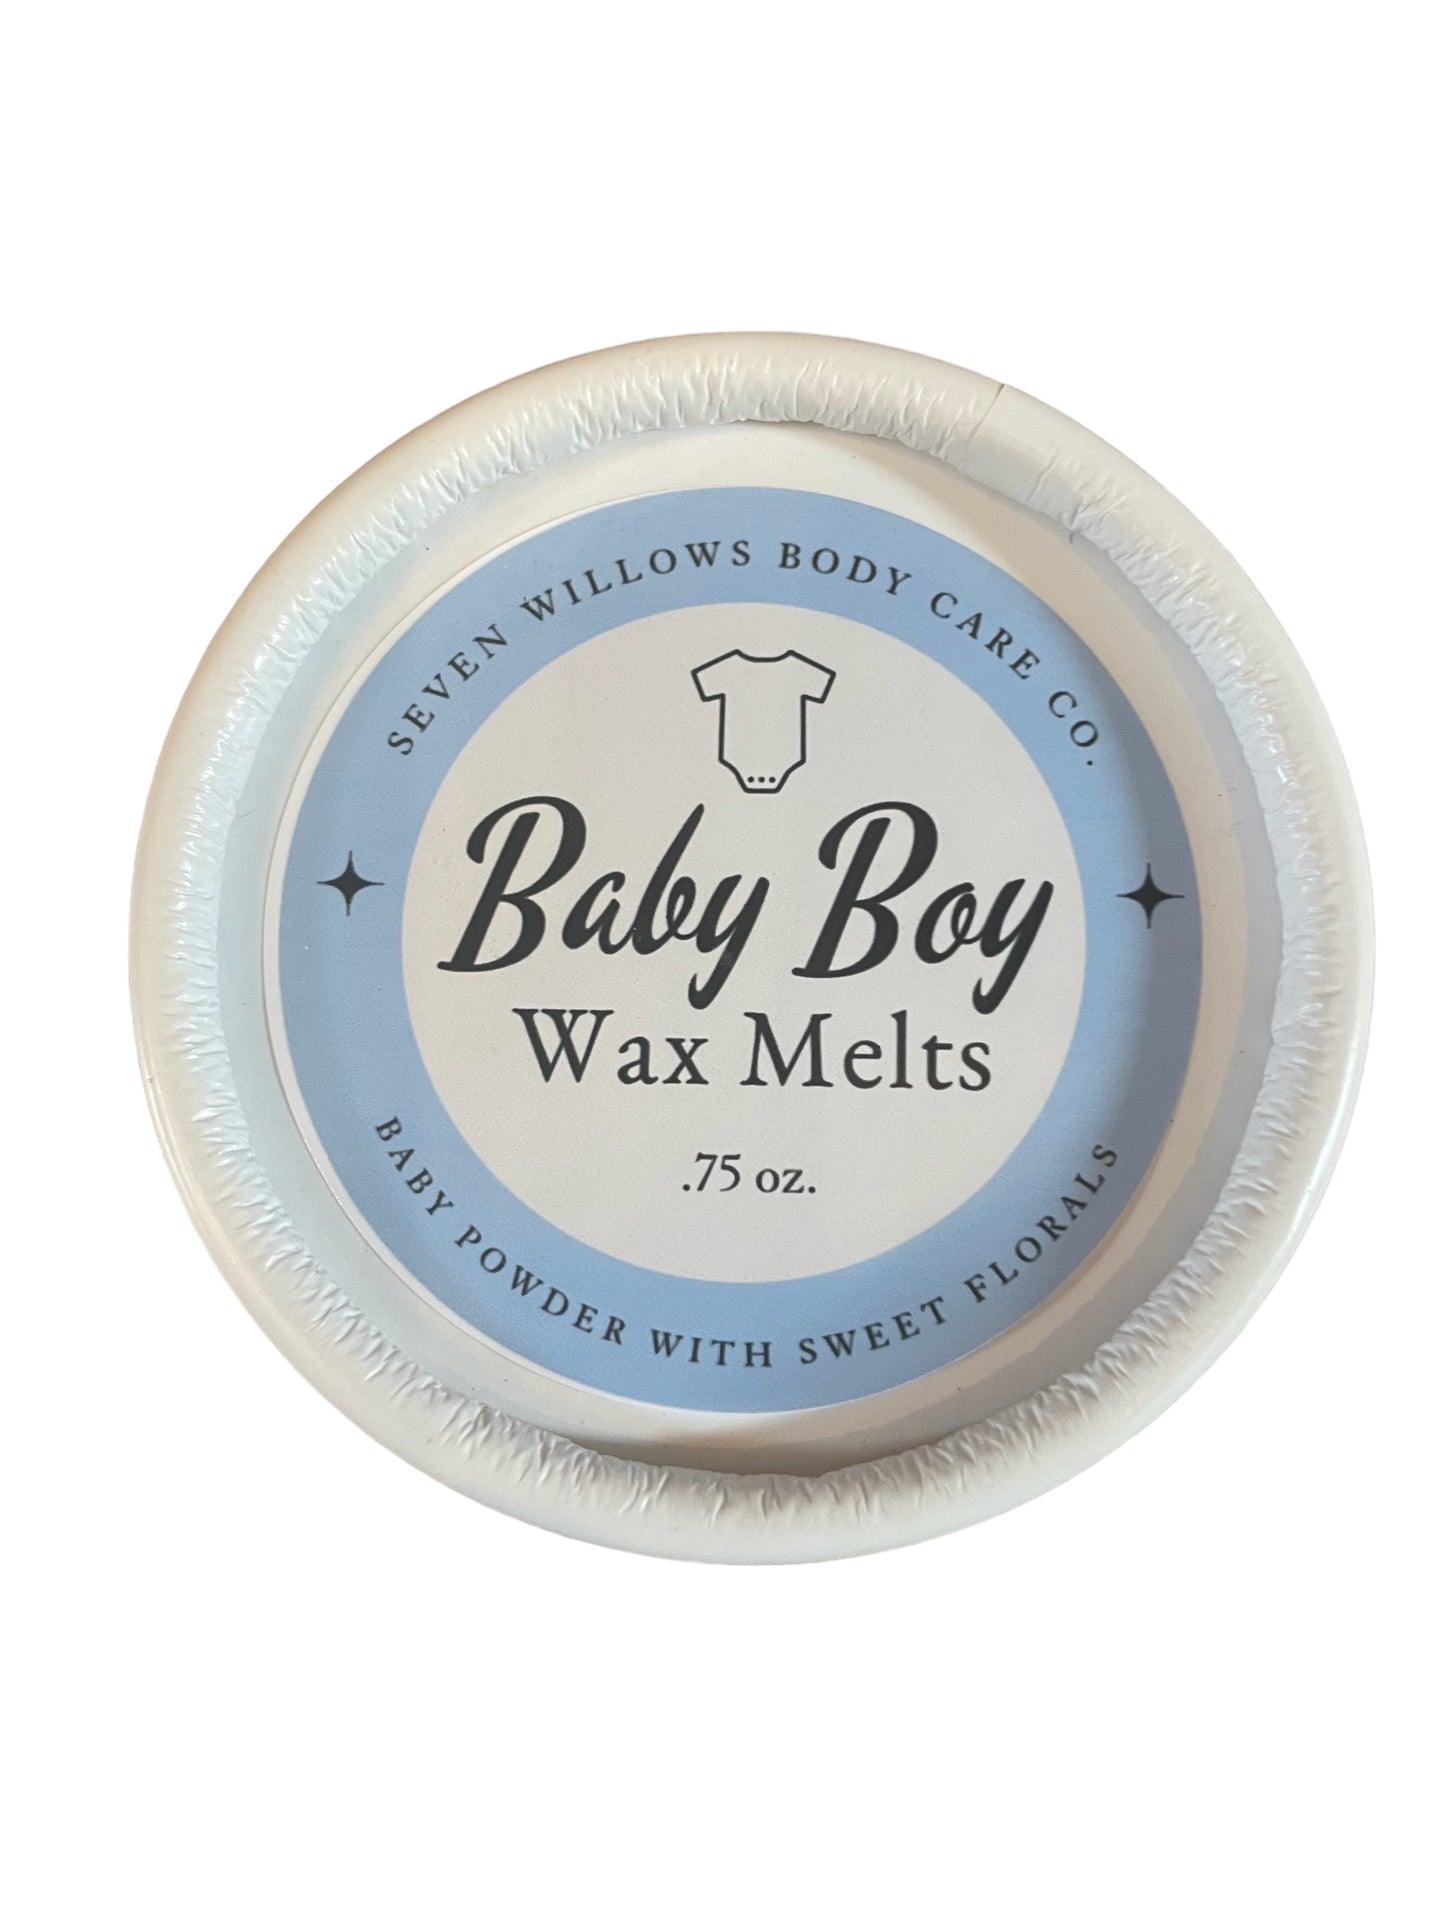 Baby Boy Wax Melts - Great for Baby Shower Gifts